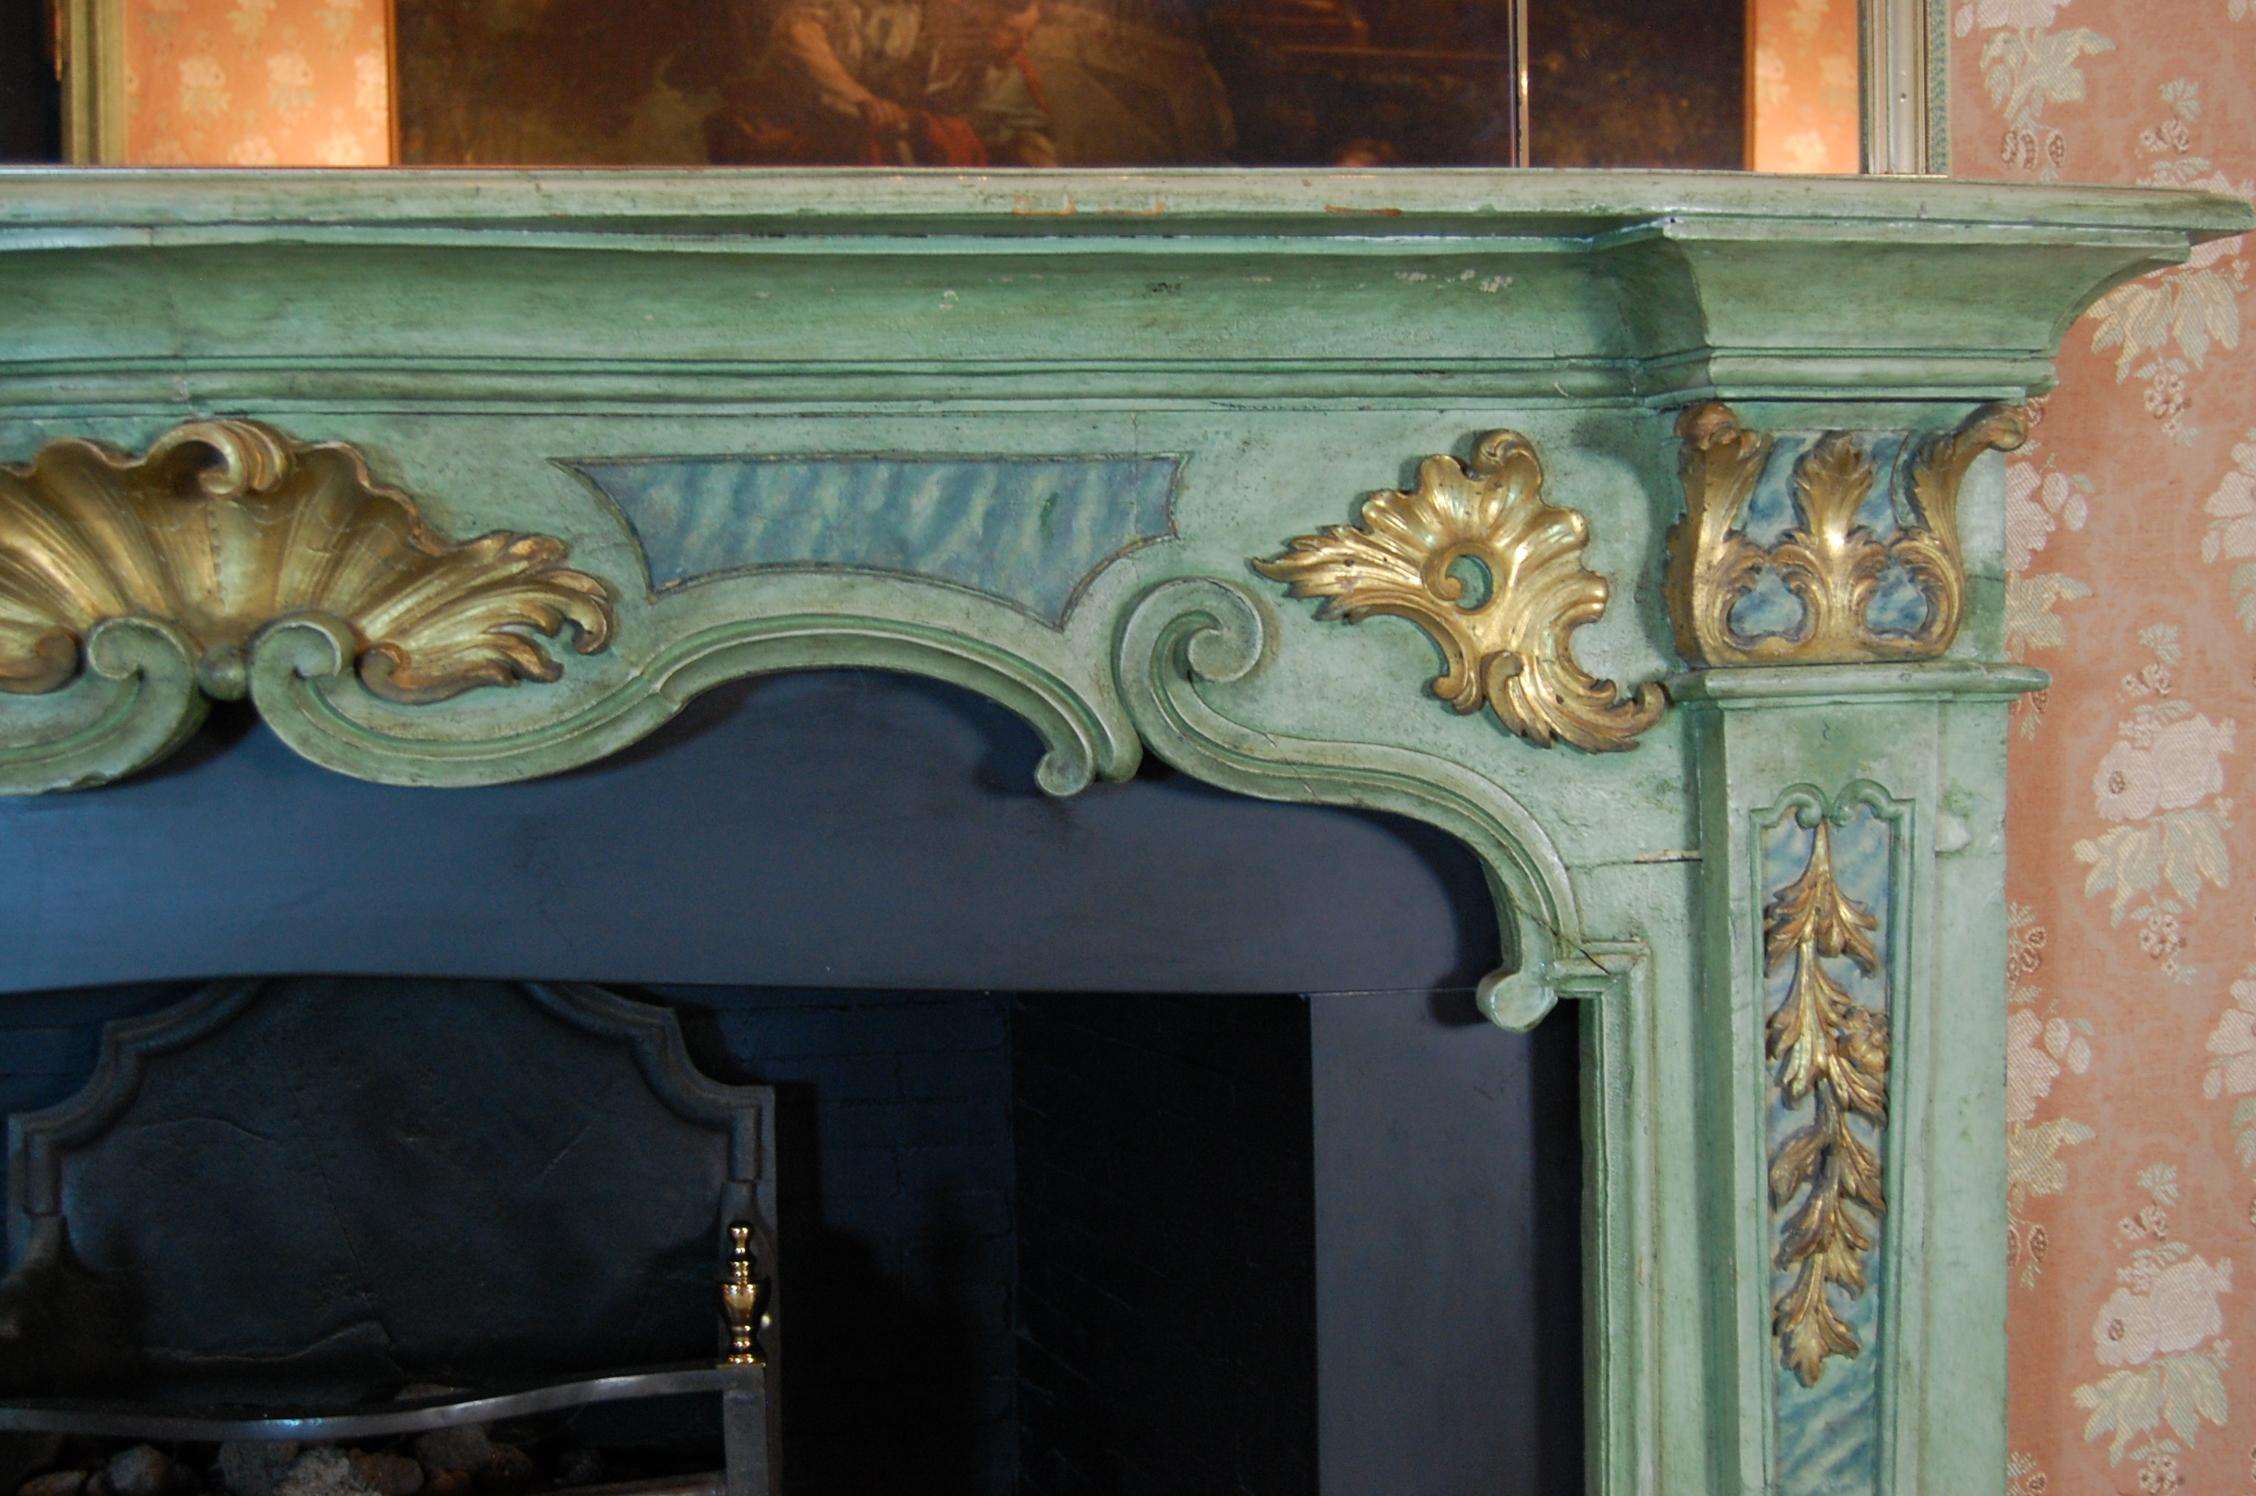 This green painted period carved wooden mantel had been purchased in 1962 from Prince Serge Obolensky of the former Soviet Union, after its removal from his New York City apartment. Old Versailles and the late Mr. Raymond Paioff in New York acted as